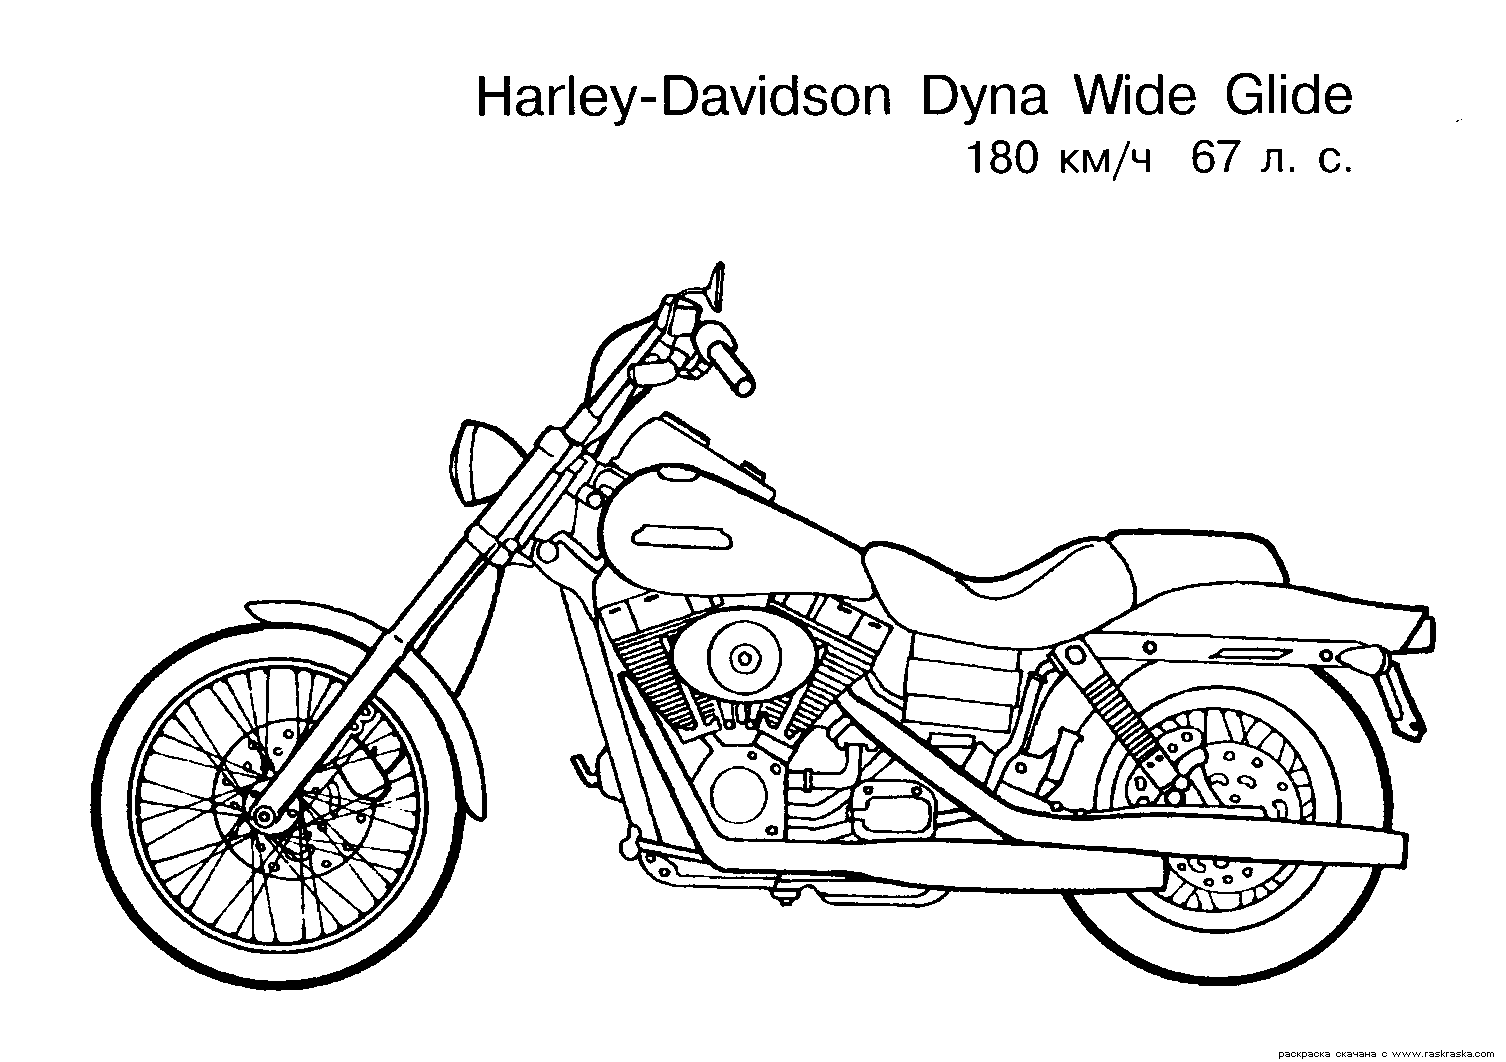  Free Motorcycle coloring page, letscoloringpages.com, Harley Davidson Dina Glide